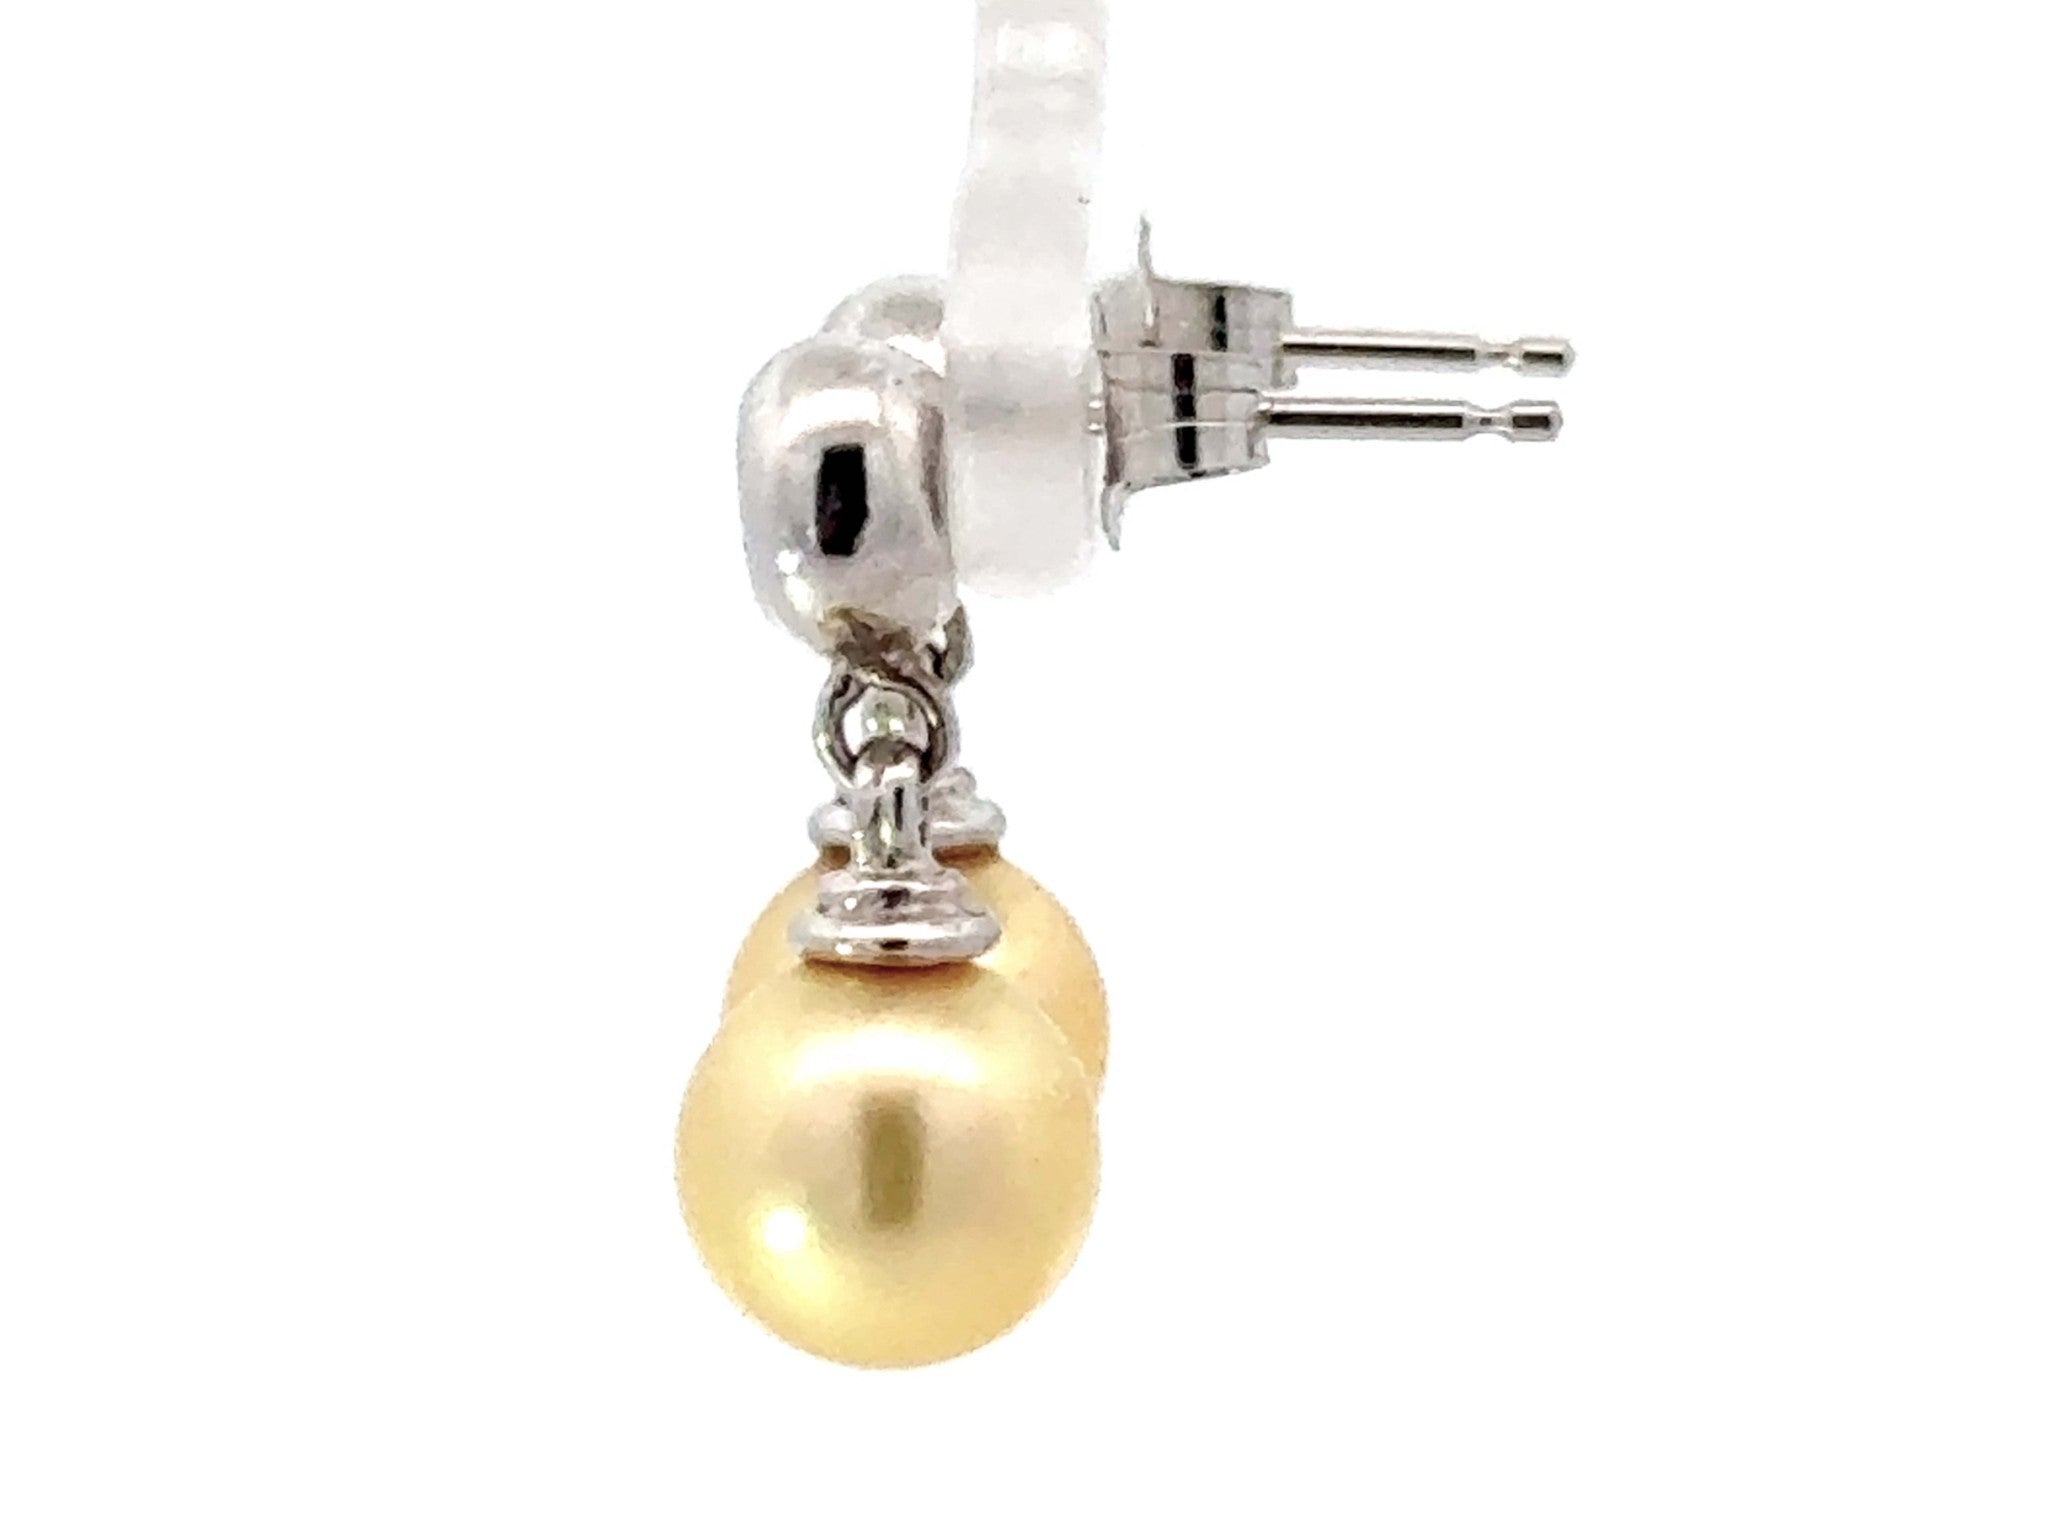 Diamond and Golden Pearl Drop Earrings 14K White Gold